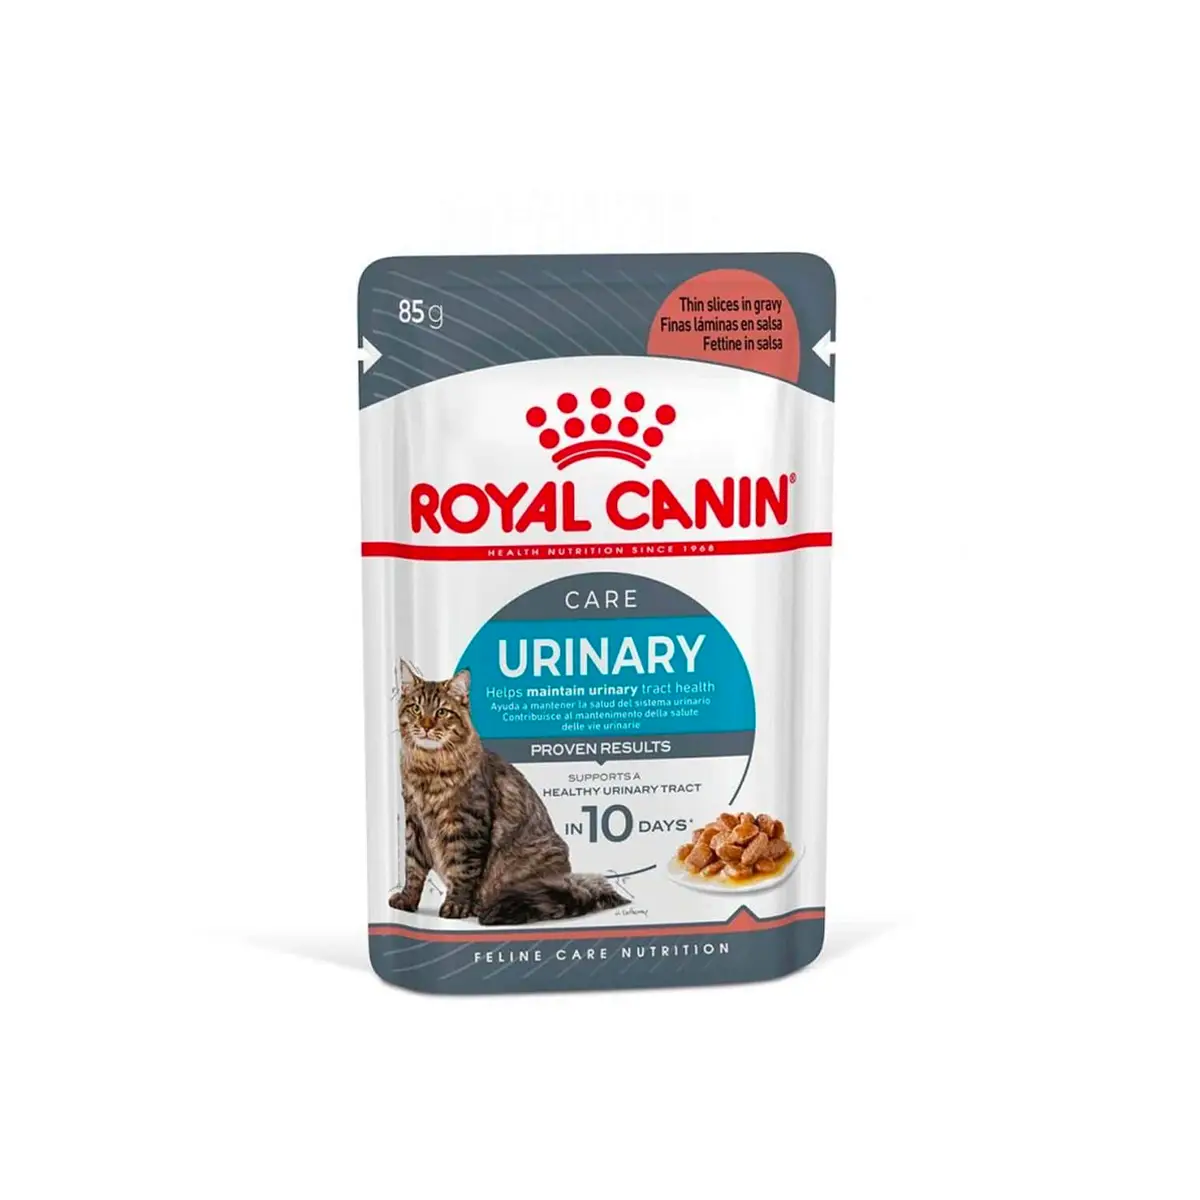 Royal Canin - Care Urinary Wet Food In Gravy 85g